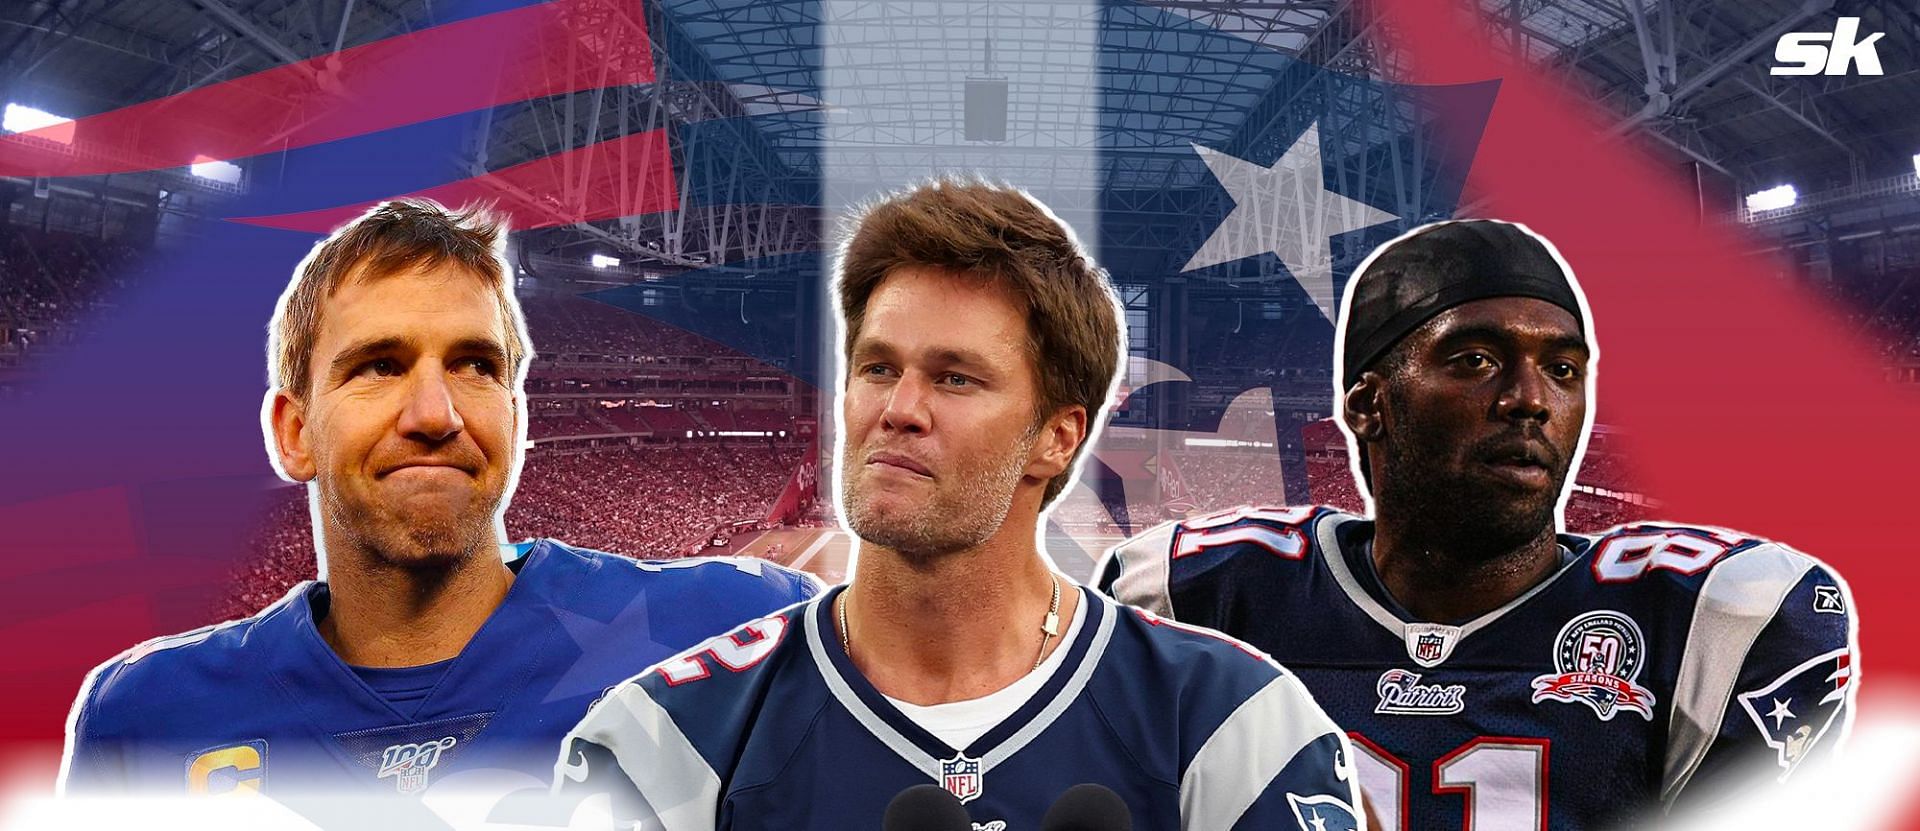 Randy Moss, Tom Brady and Eli Manning get candid about Super Bowl 